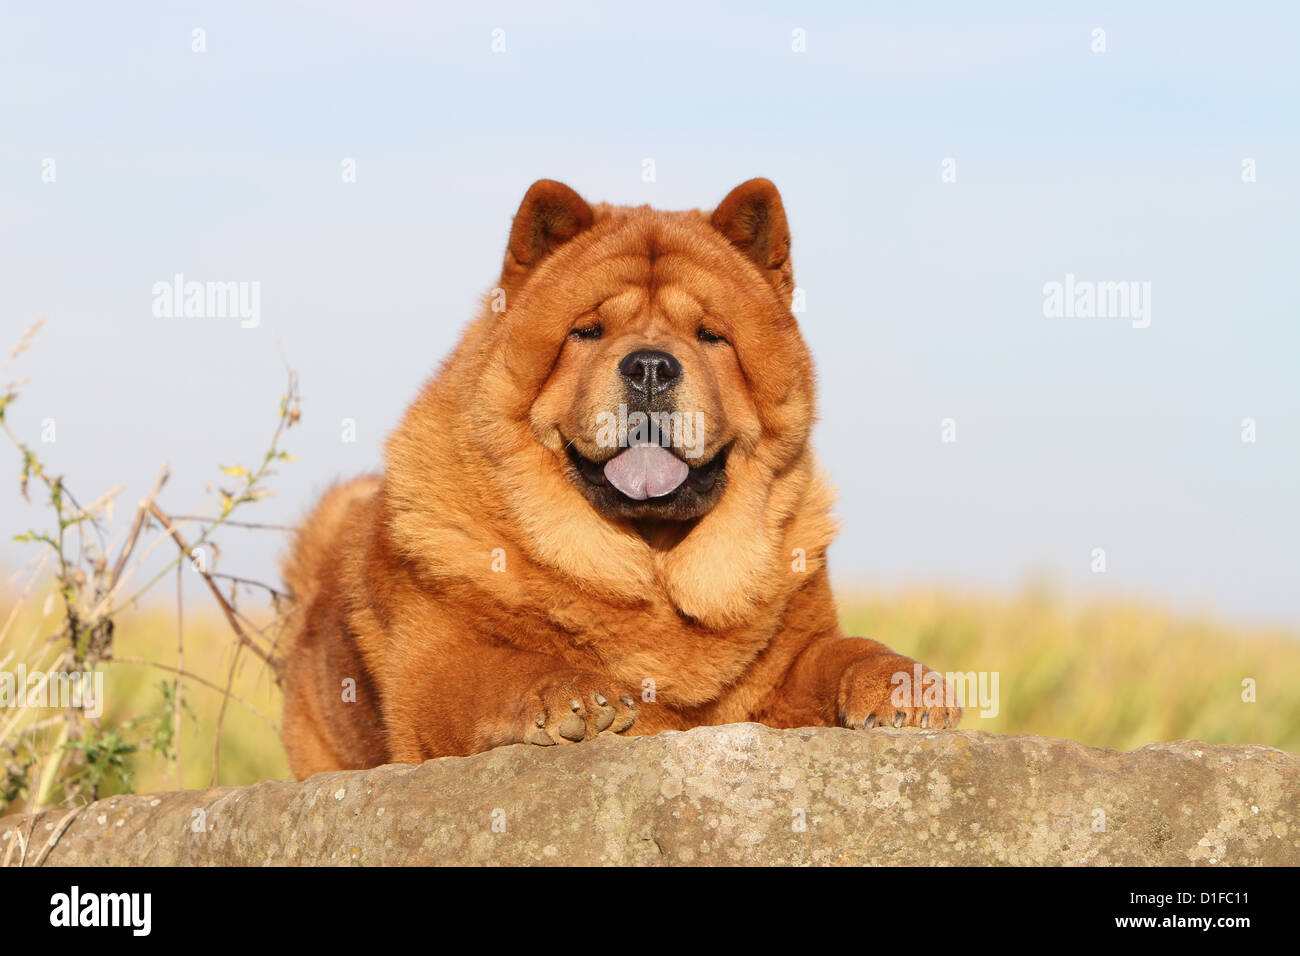 Dog Chow Chow Chow Chow China Cinnamon Red Face Lying Down Adult Adults Dogs Rock Portrait Lion Field Short Hair Shorthaired Stock Photo Alamy